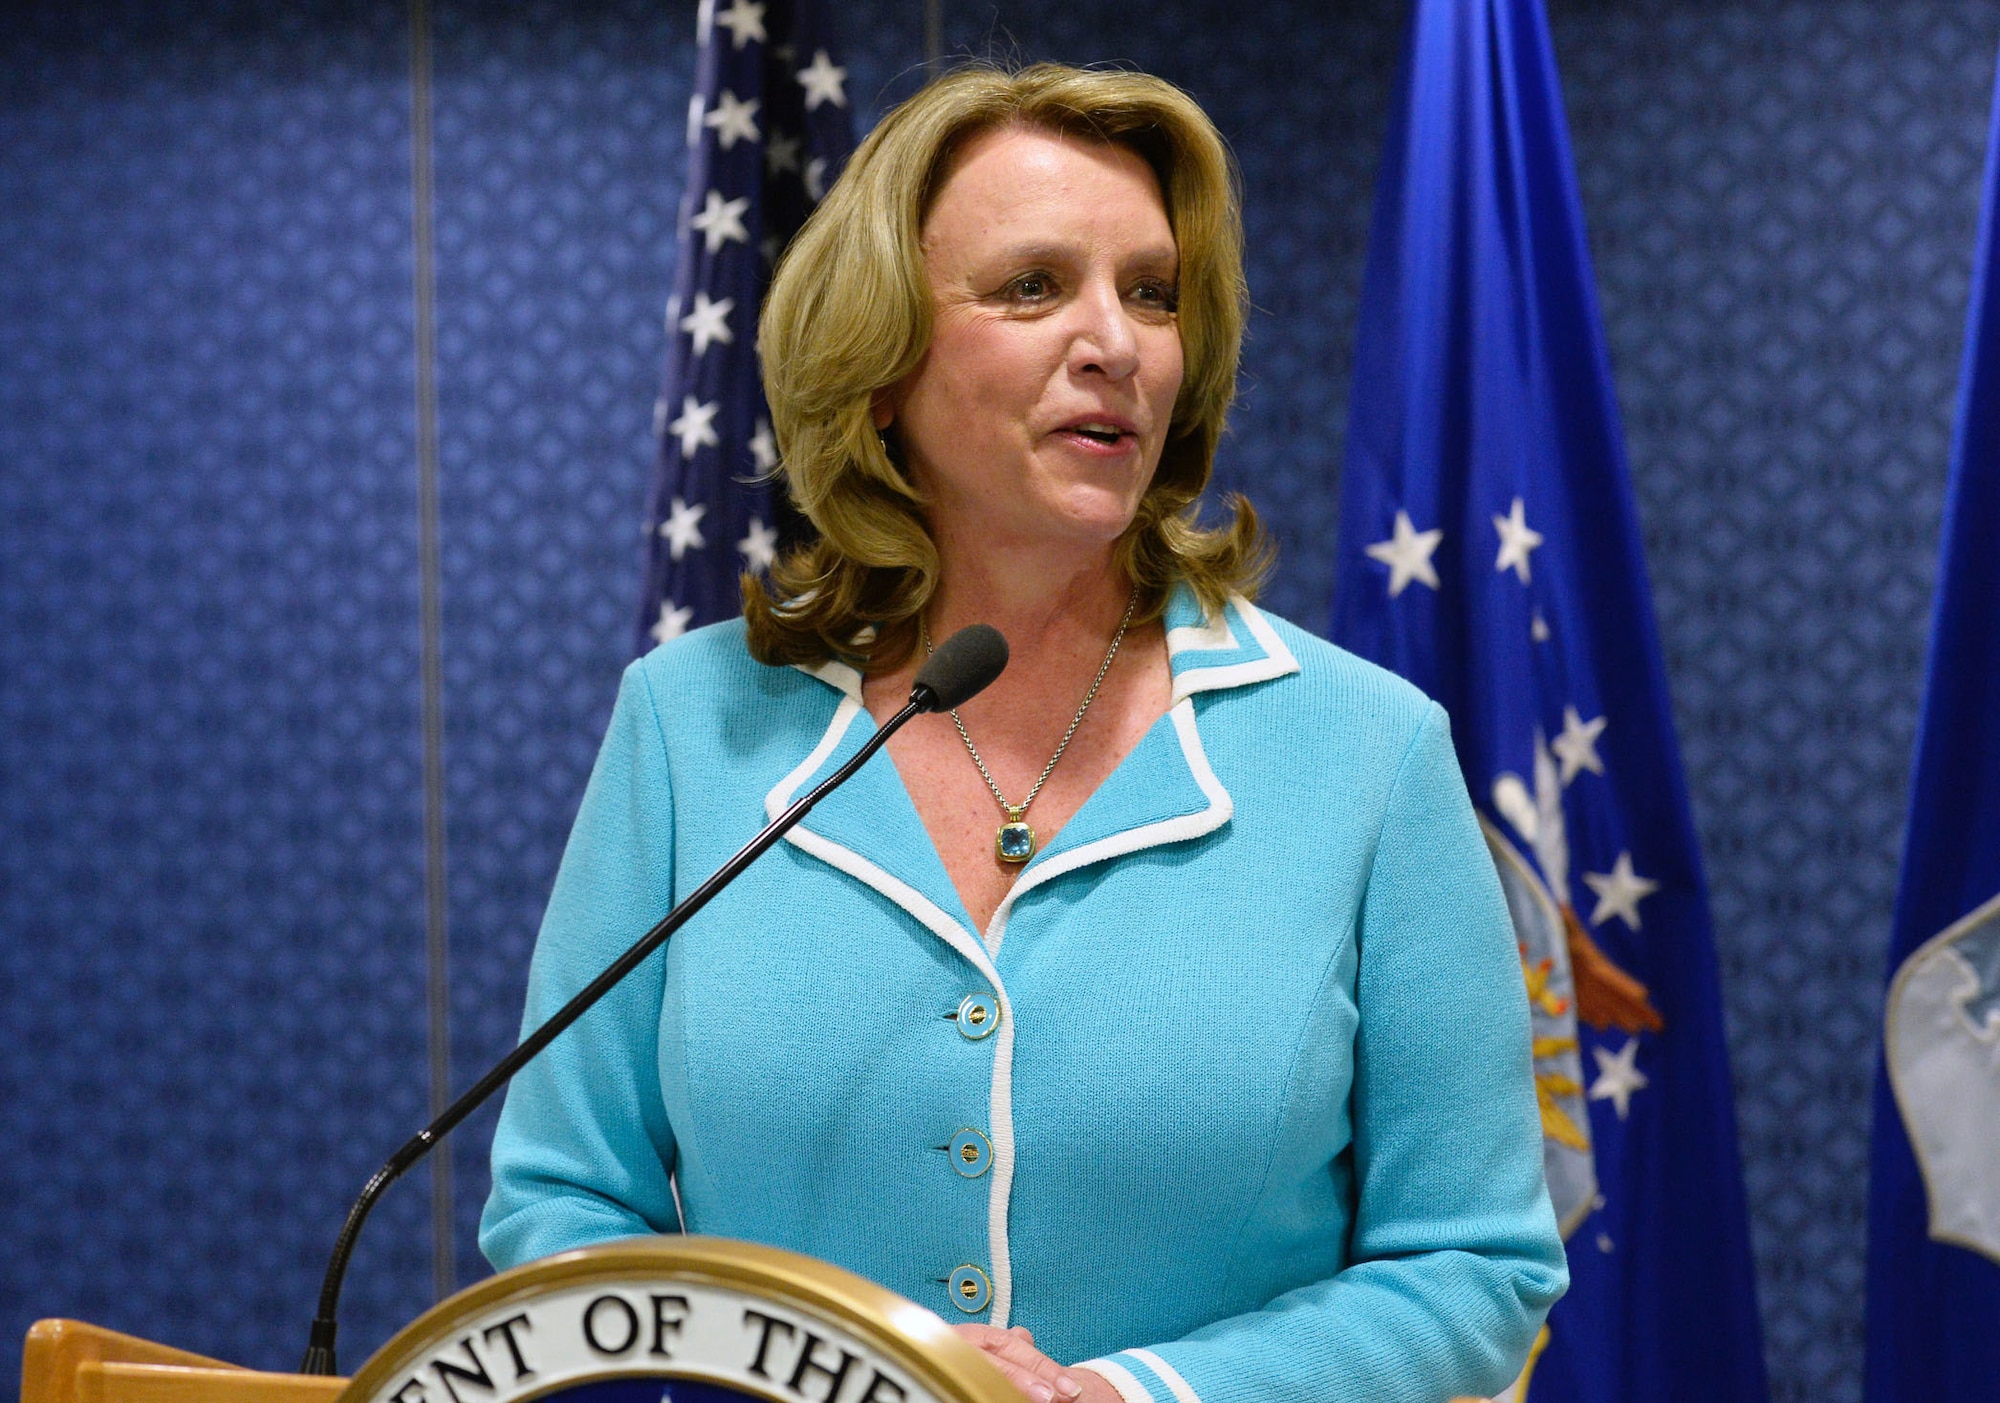 Air Force Secretary Deborah Lee James speaks during the announcement of the 18th Chief Master Sergeant of the Air Force at the Pentagon Nov. 16, 2016. Air Force Chief of Staff Gen. David L. Goldfein named Chief Master Sgt. Kaleth O. Wright as the Air Force’s next senior enlisted Airman. (U.S. Air Force photo/Staff Sgt. Alyssa C. Gibson)